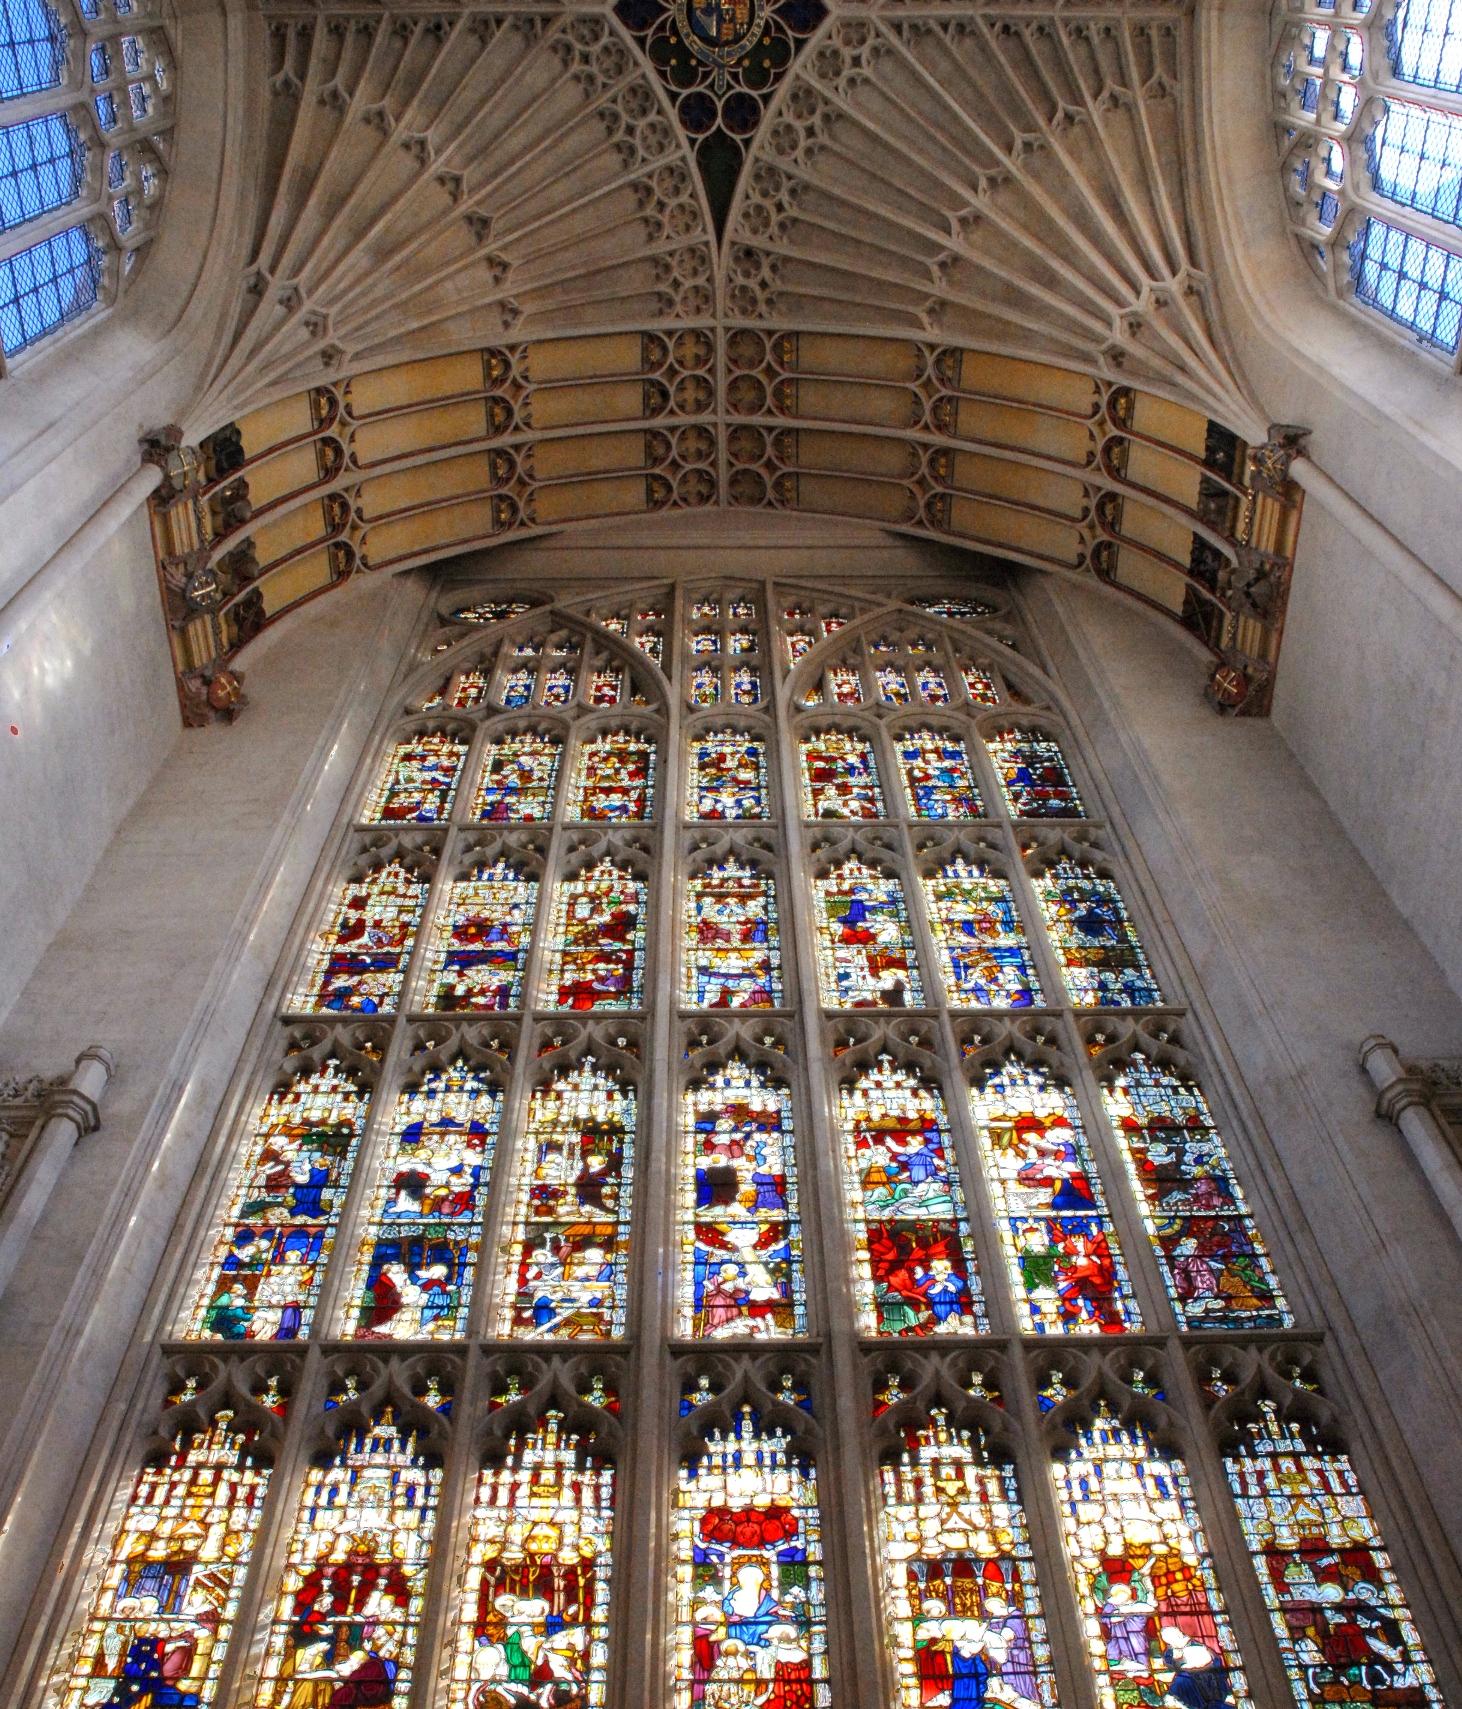 Stained glass window at the east end of the Abbey